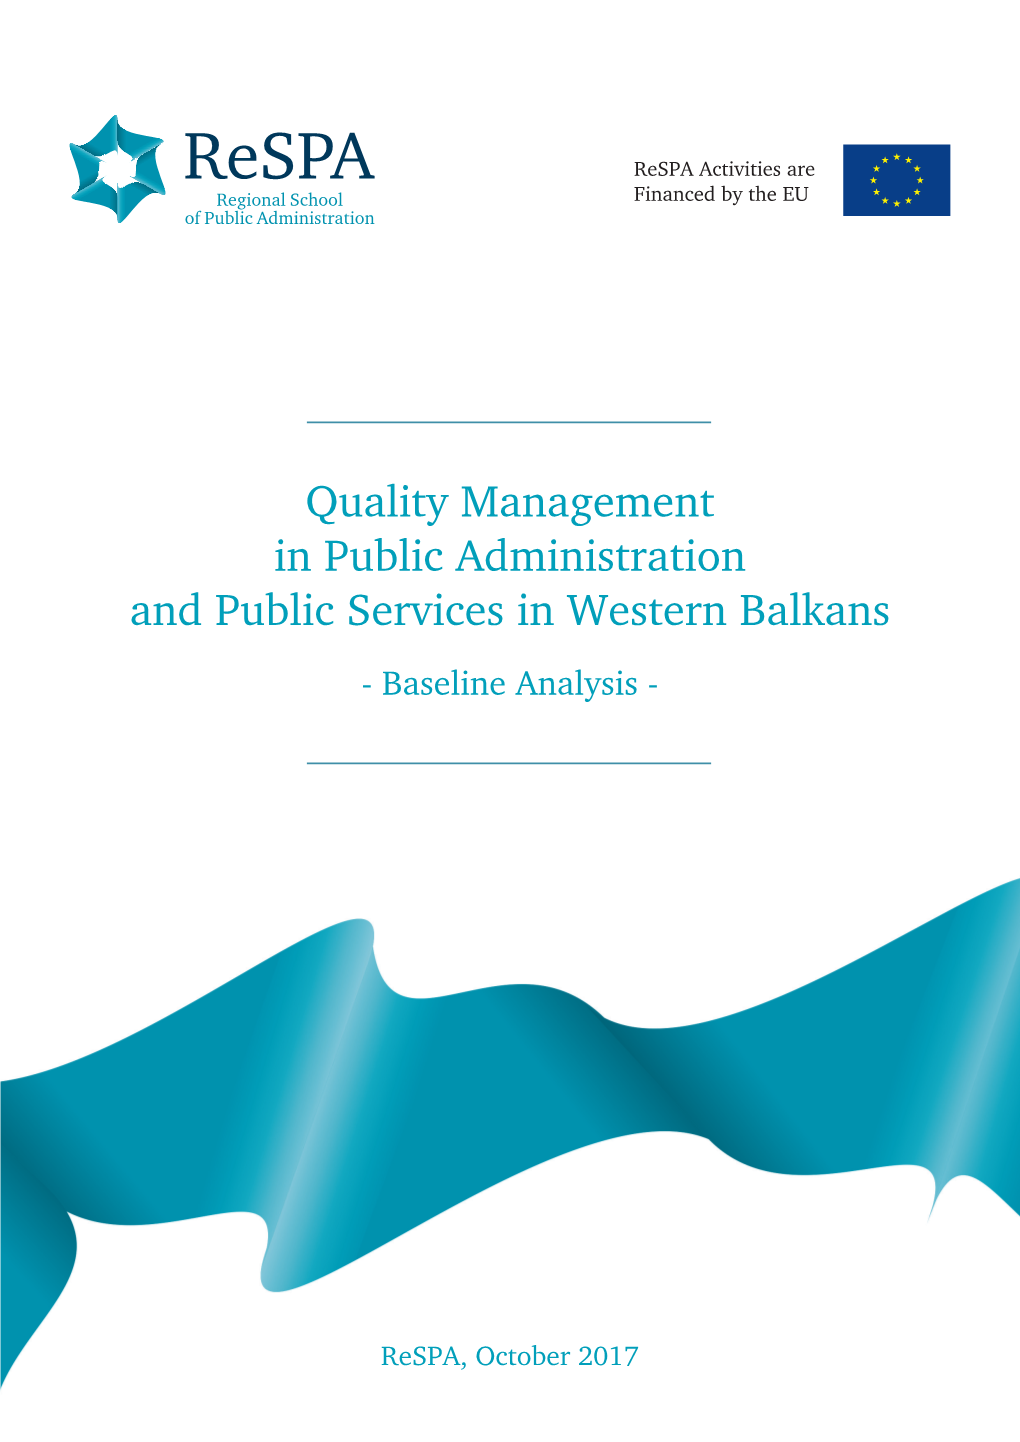 QM in PA and PS) in the Western Balkans” Within the Regional School of Public Administration (Respa)